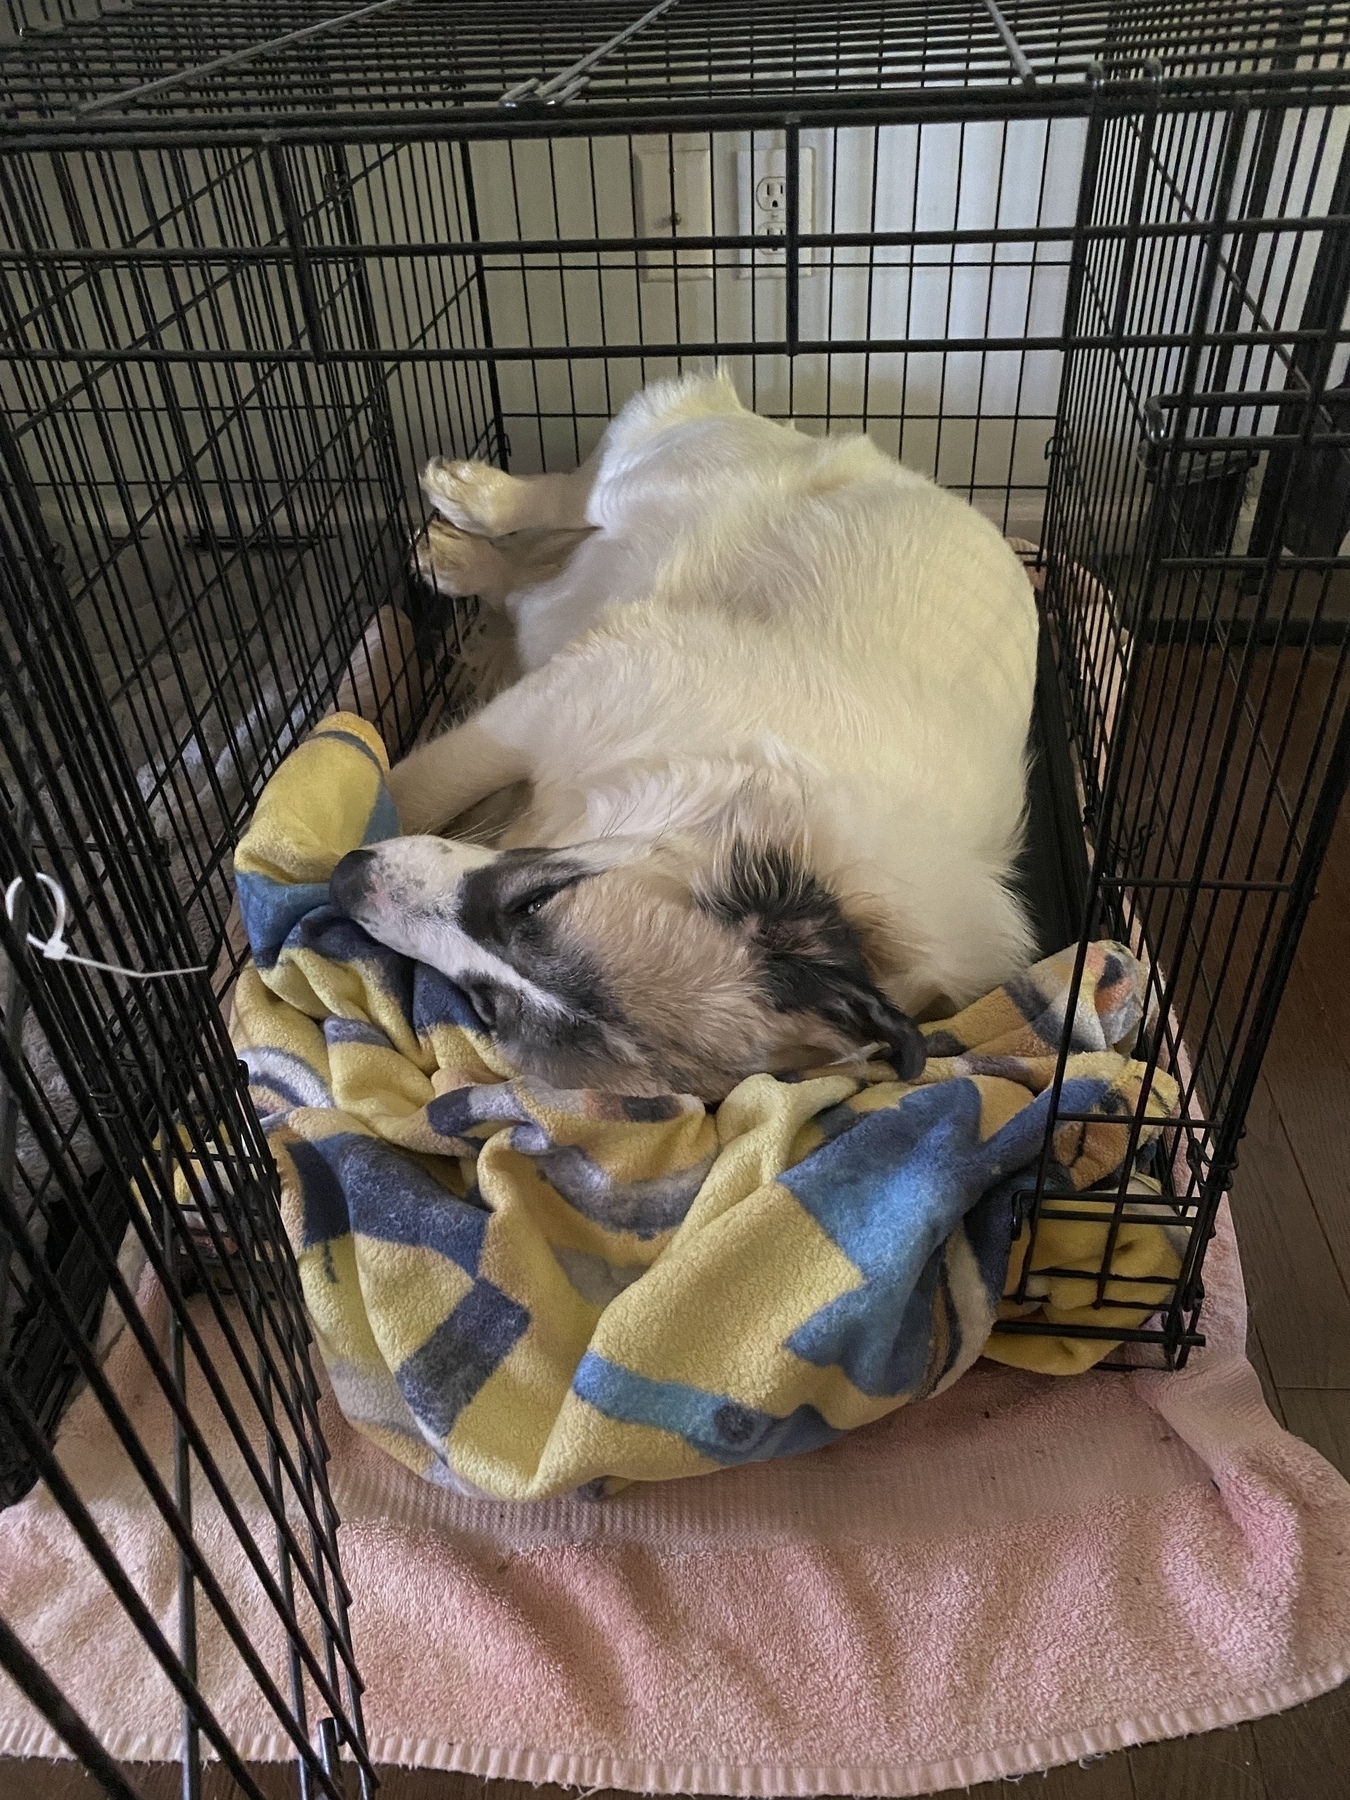 A Great Pyrenees puppy named Gracie sleeping in a crate meant for a medium sized dog. 